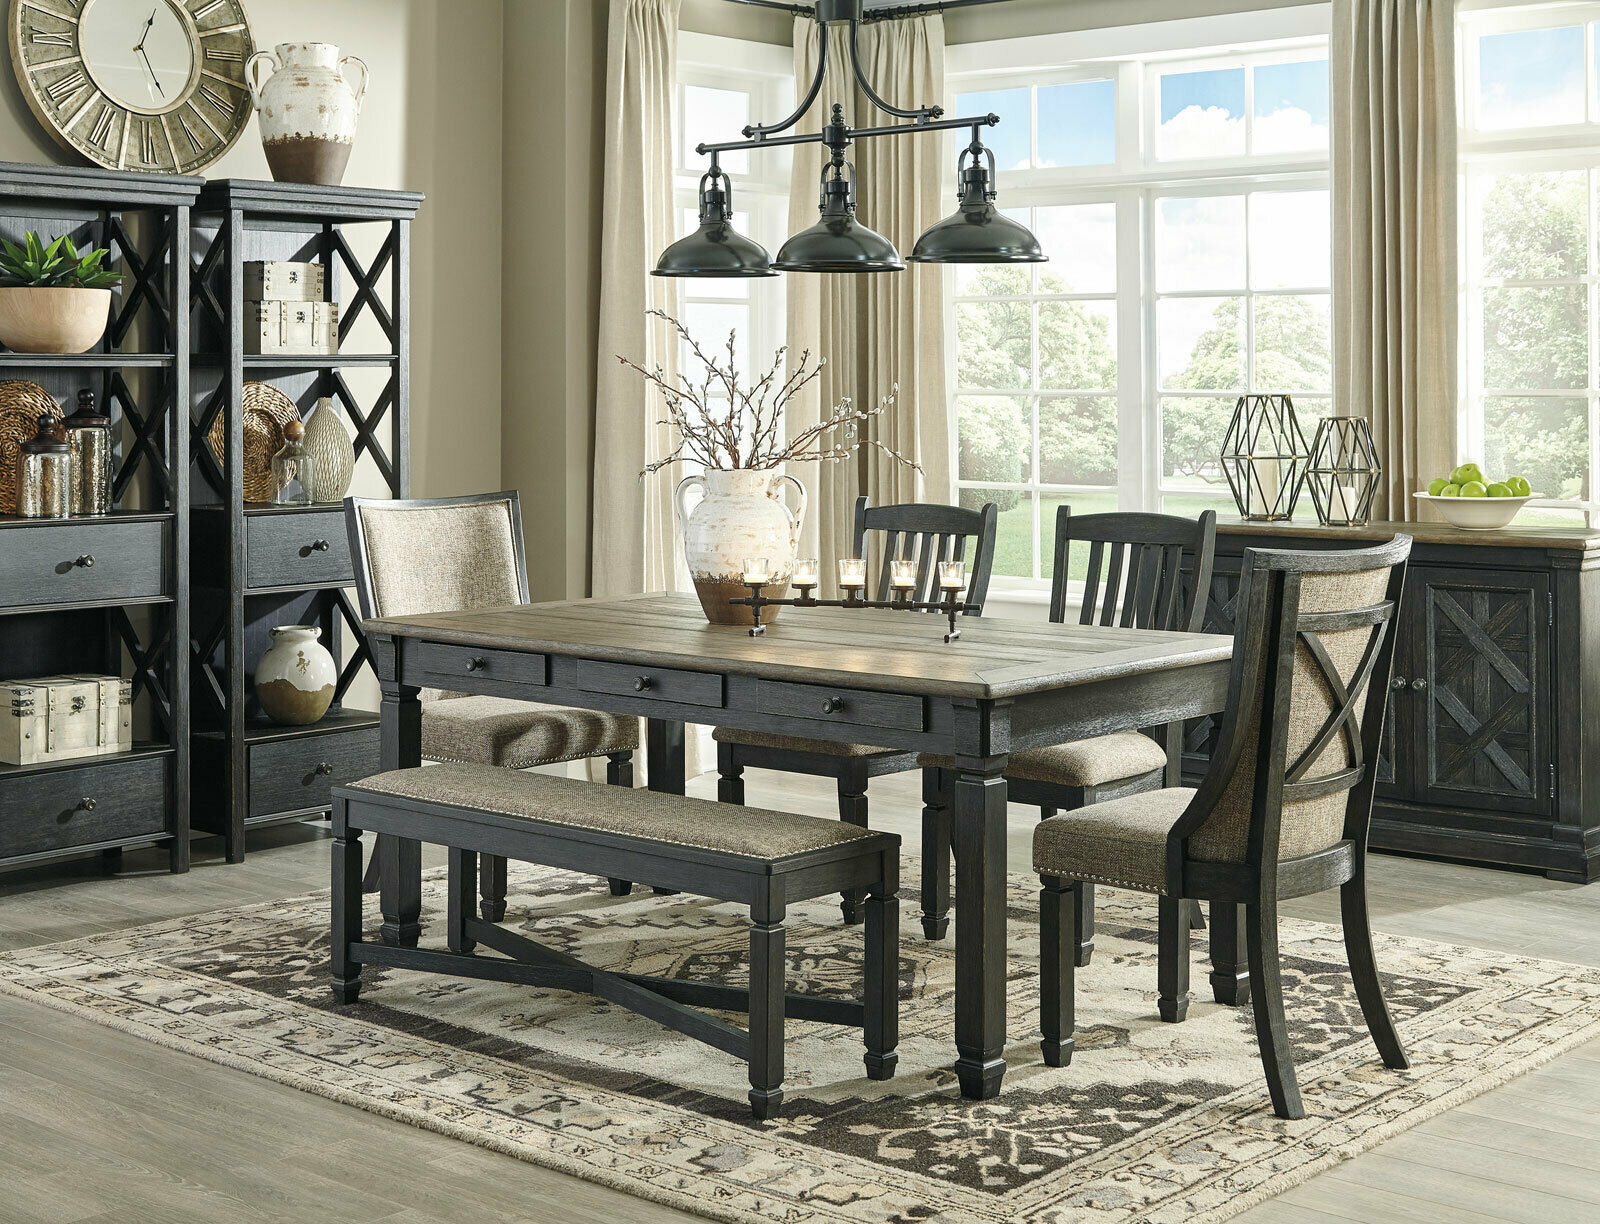 NEW Traditional Rustic Black & Brown 6pc Dining Room Table Bench Chairs